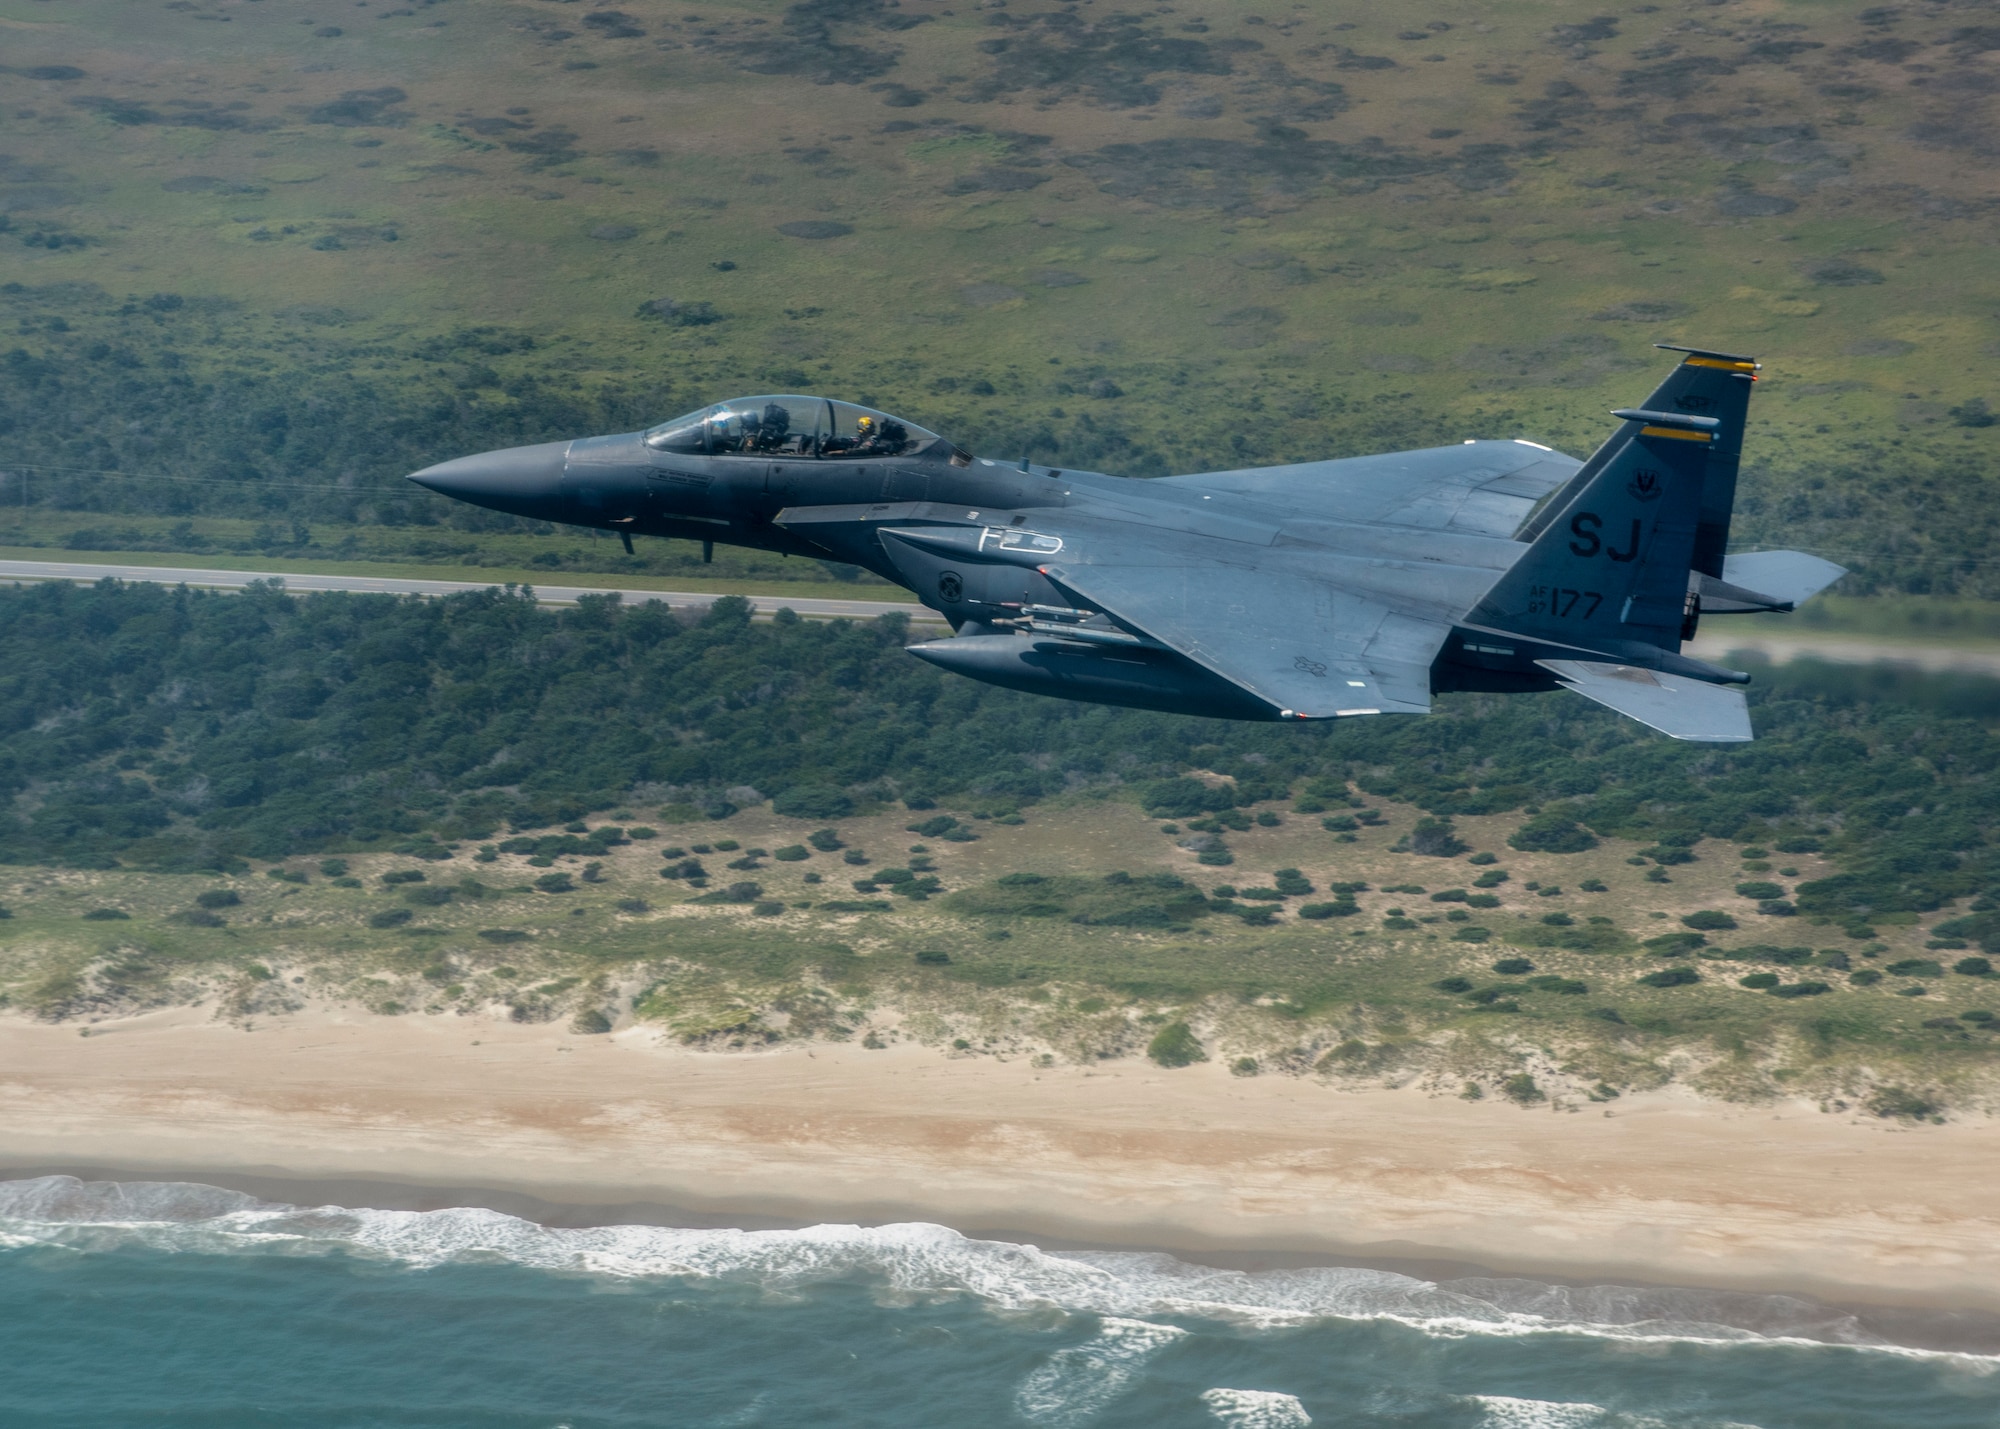 An F-15E Strike Eagle from the 336th Fighter Squadron at Seymour Johnson Air Force Base flies in the sky over the North Carolina coast.